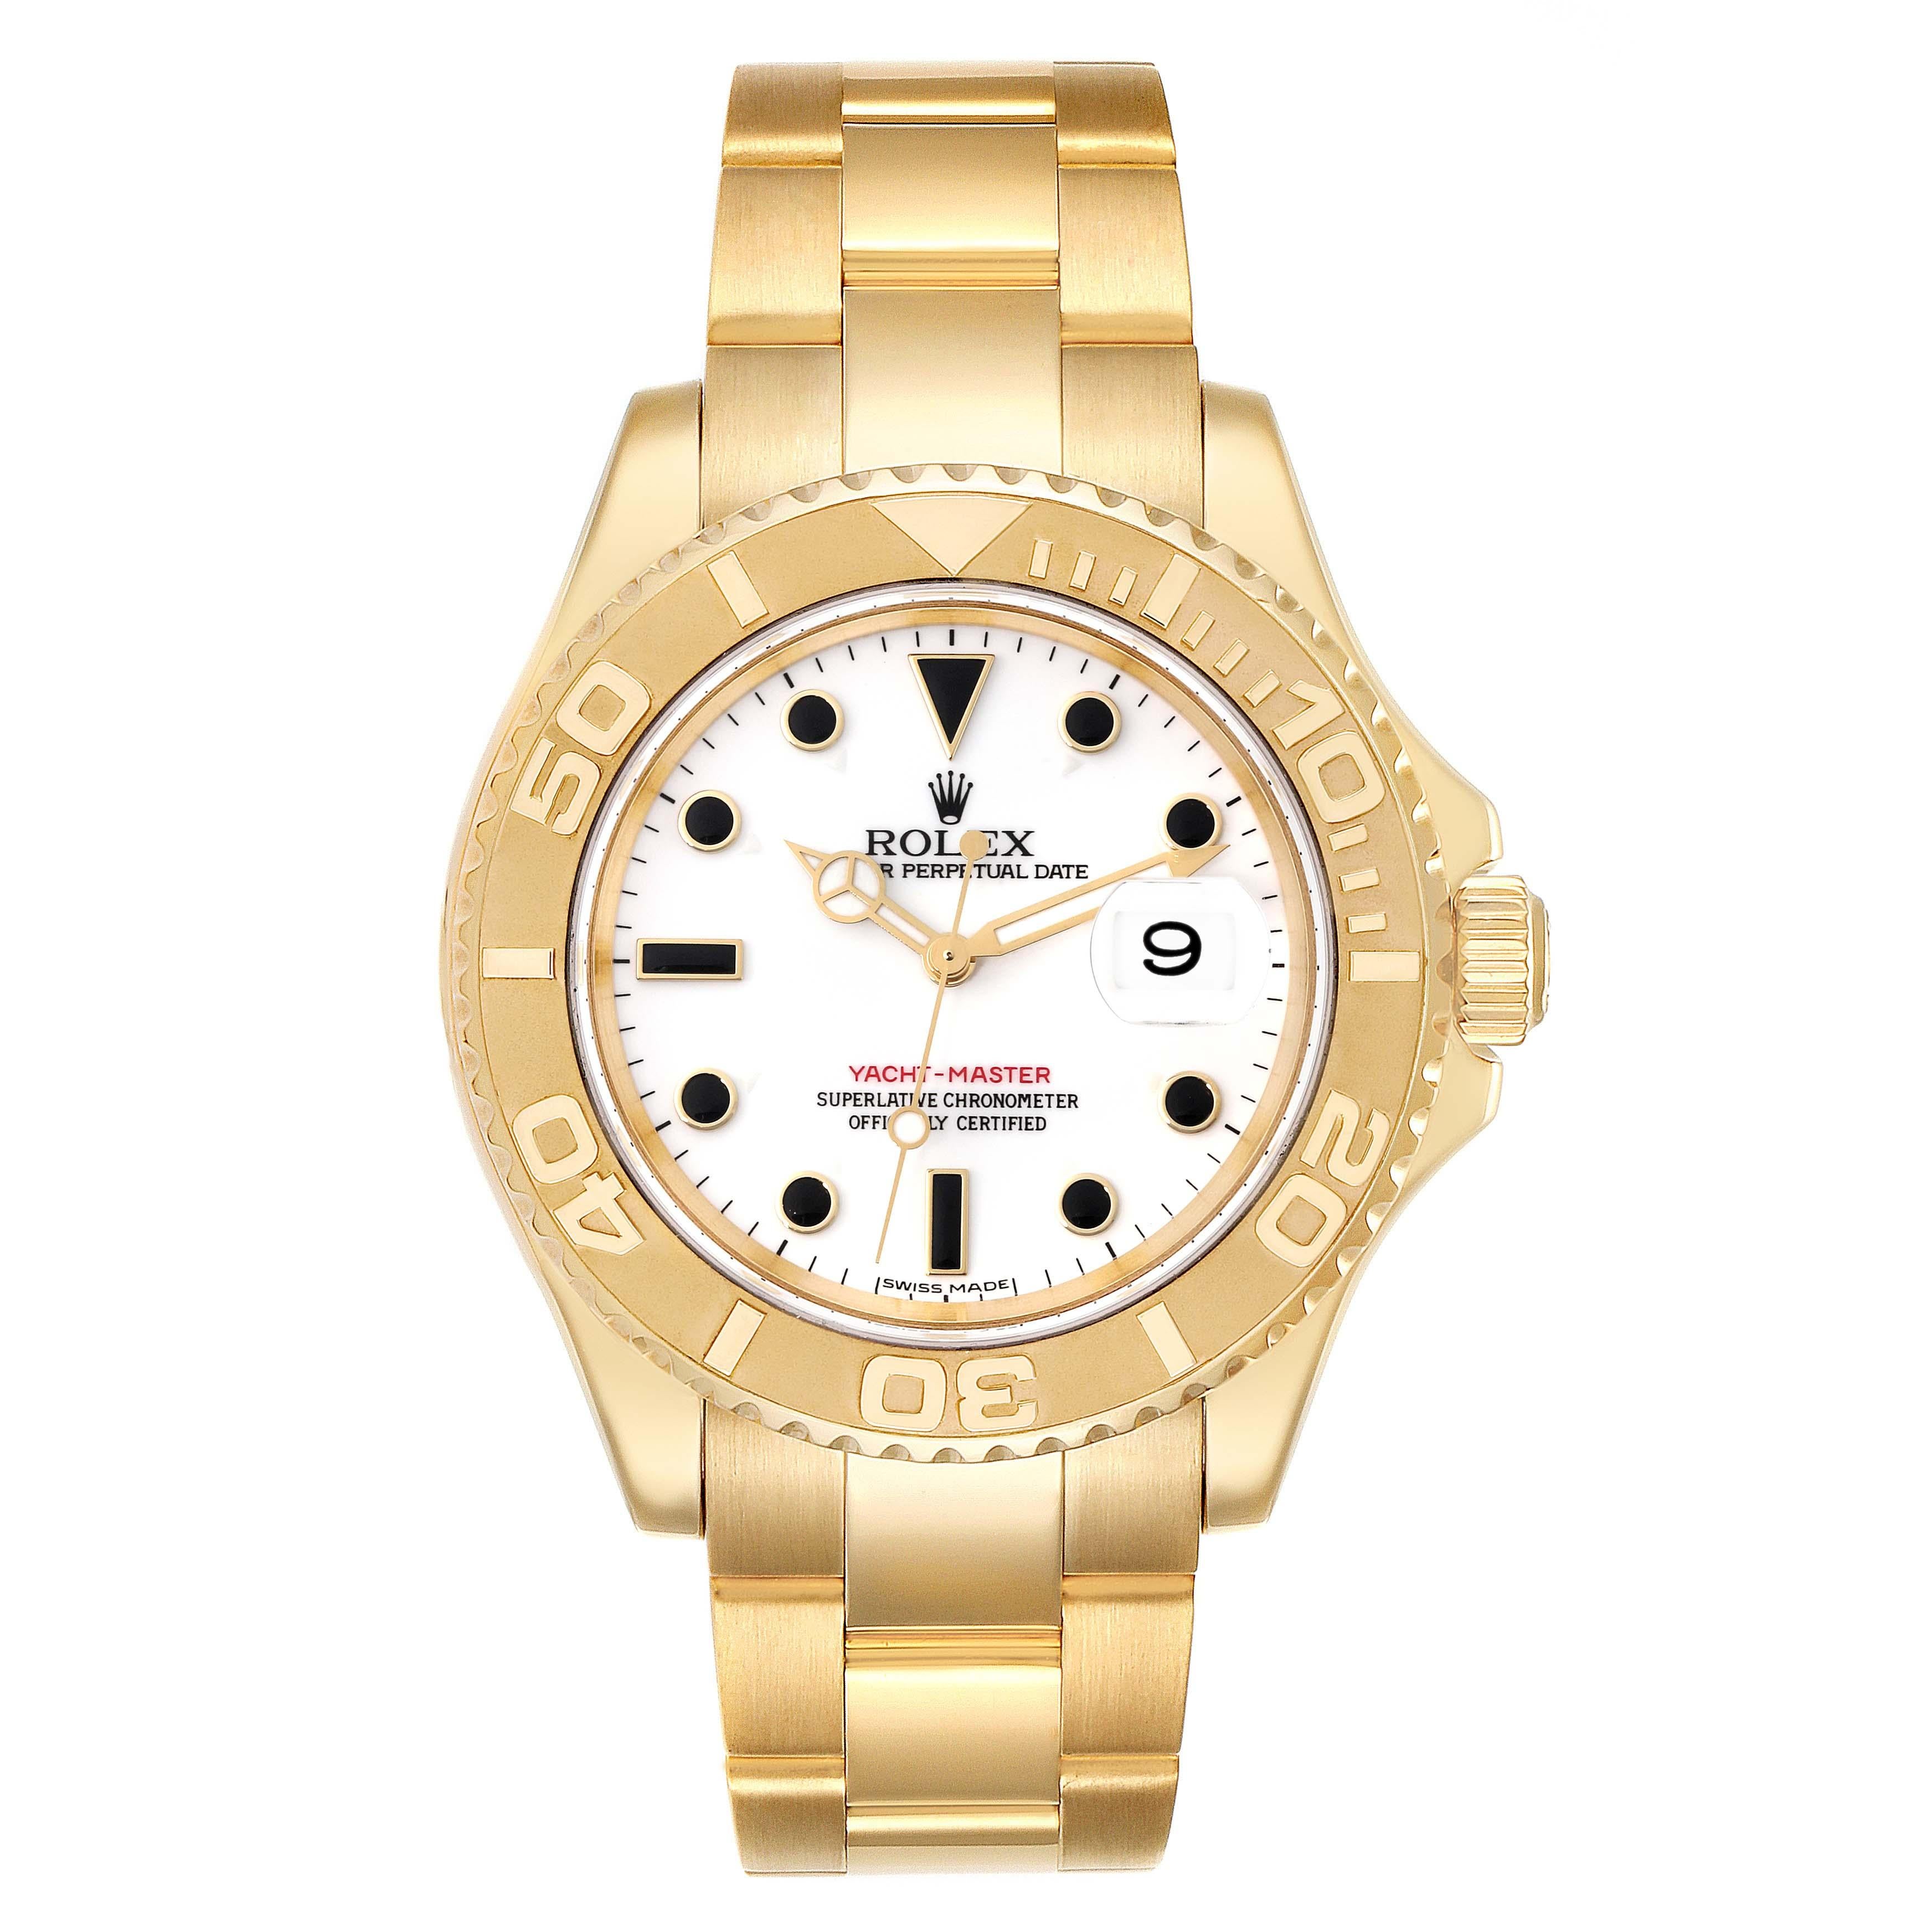 Rolex Yachtmaster 40mm Yellow Gold White Dial Mens Watch 16628. Officially certified chronometer automatic self-winding movement. Rhodium-plated, oeil-de-perdrix decoration, straight-line lever escapement, freesprung monometallic balance adjusted to